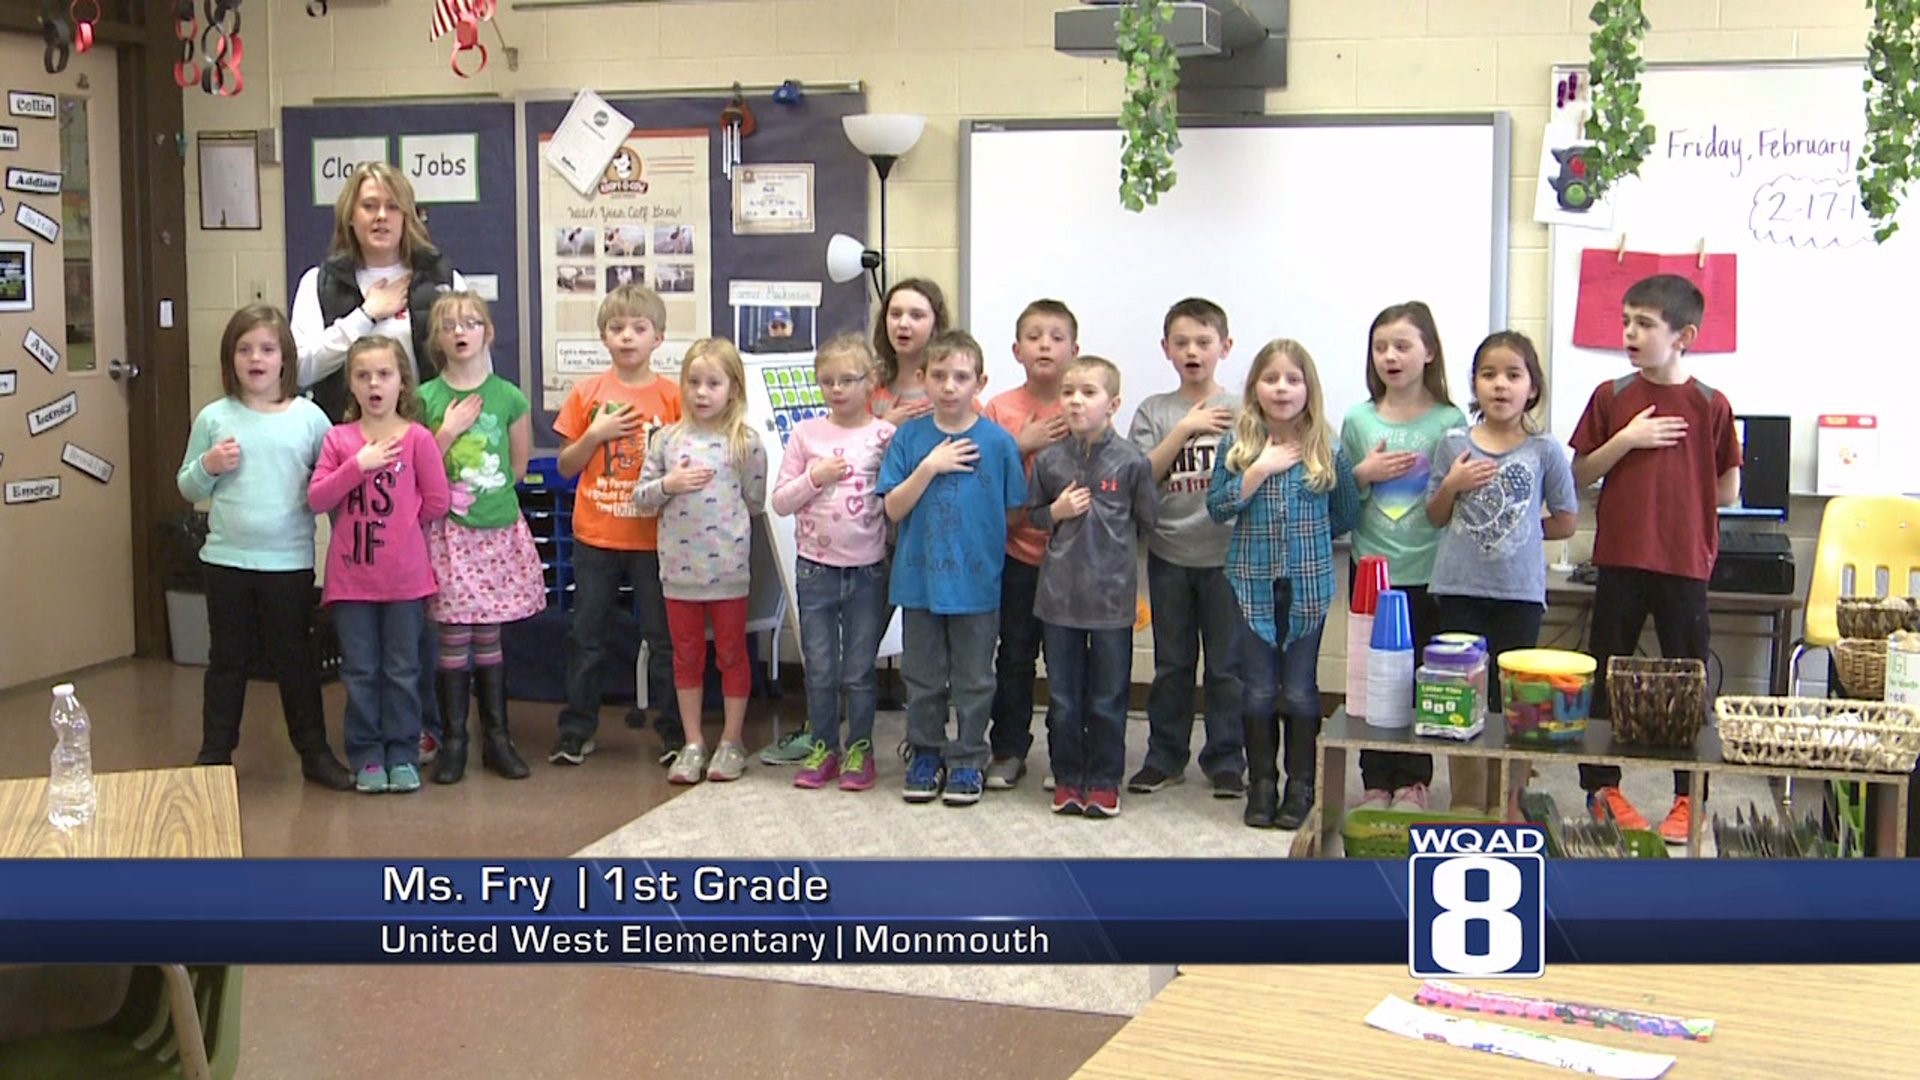 Monmouth West Elementary Mrs. Fry 1st grade